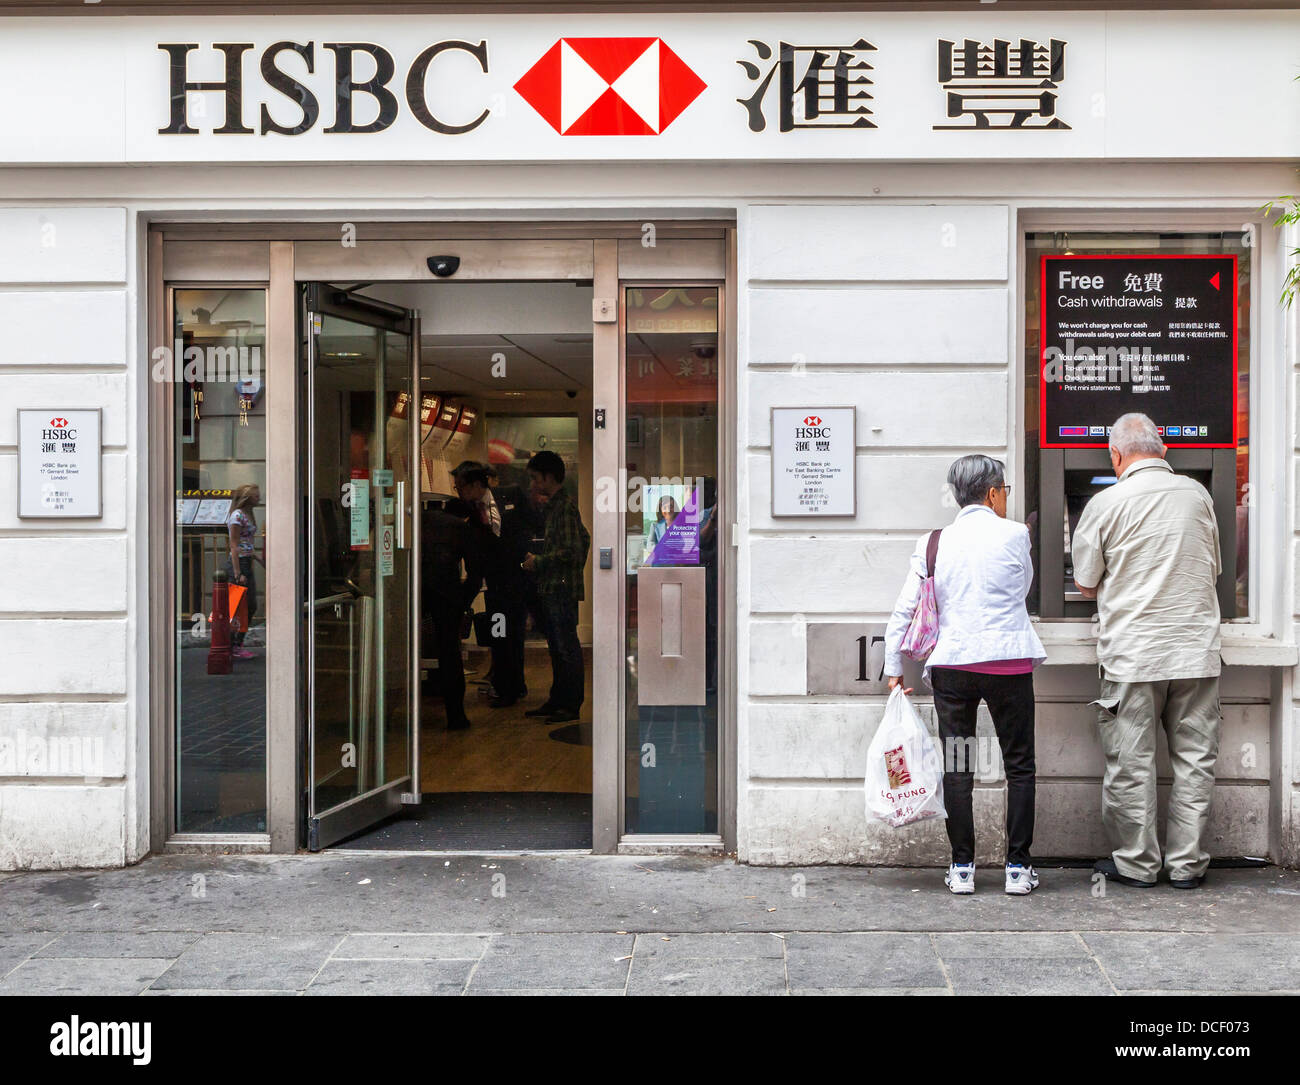 Senior man and woman use ATM under bilingual lettering of the HSBC bank, Gerrard Street, ChinaTown, London W1 Stock Photo